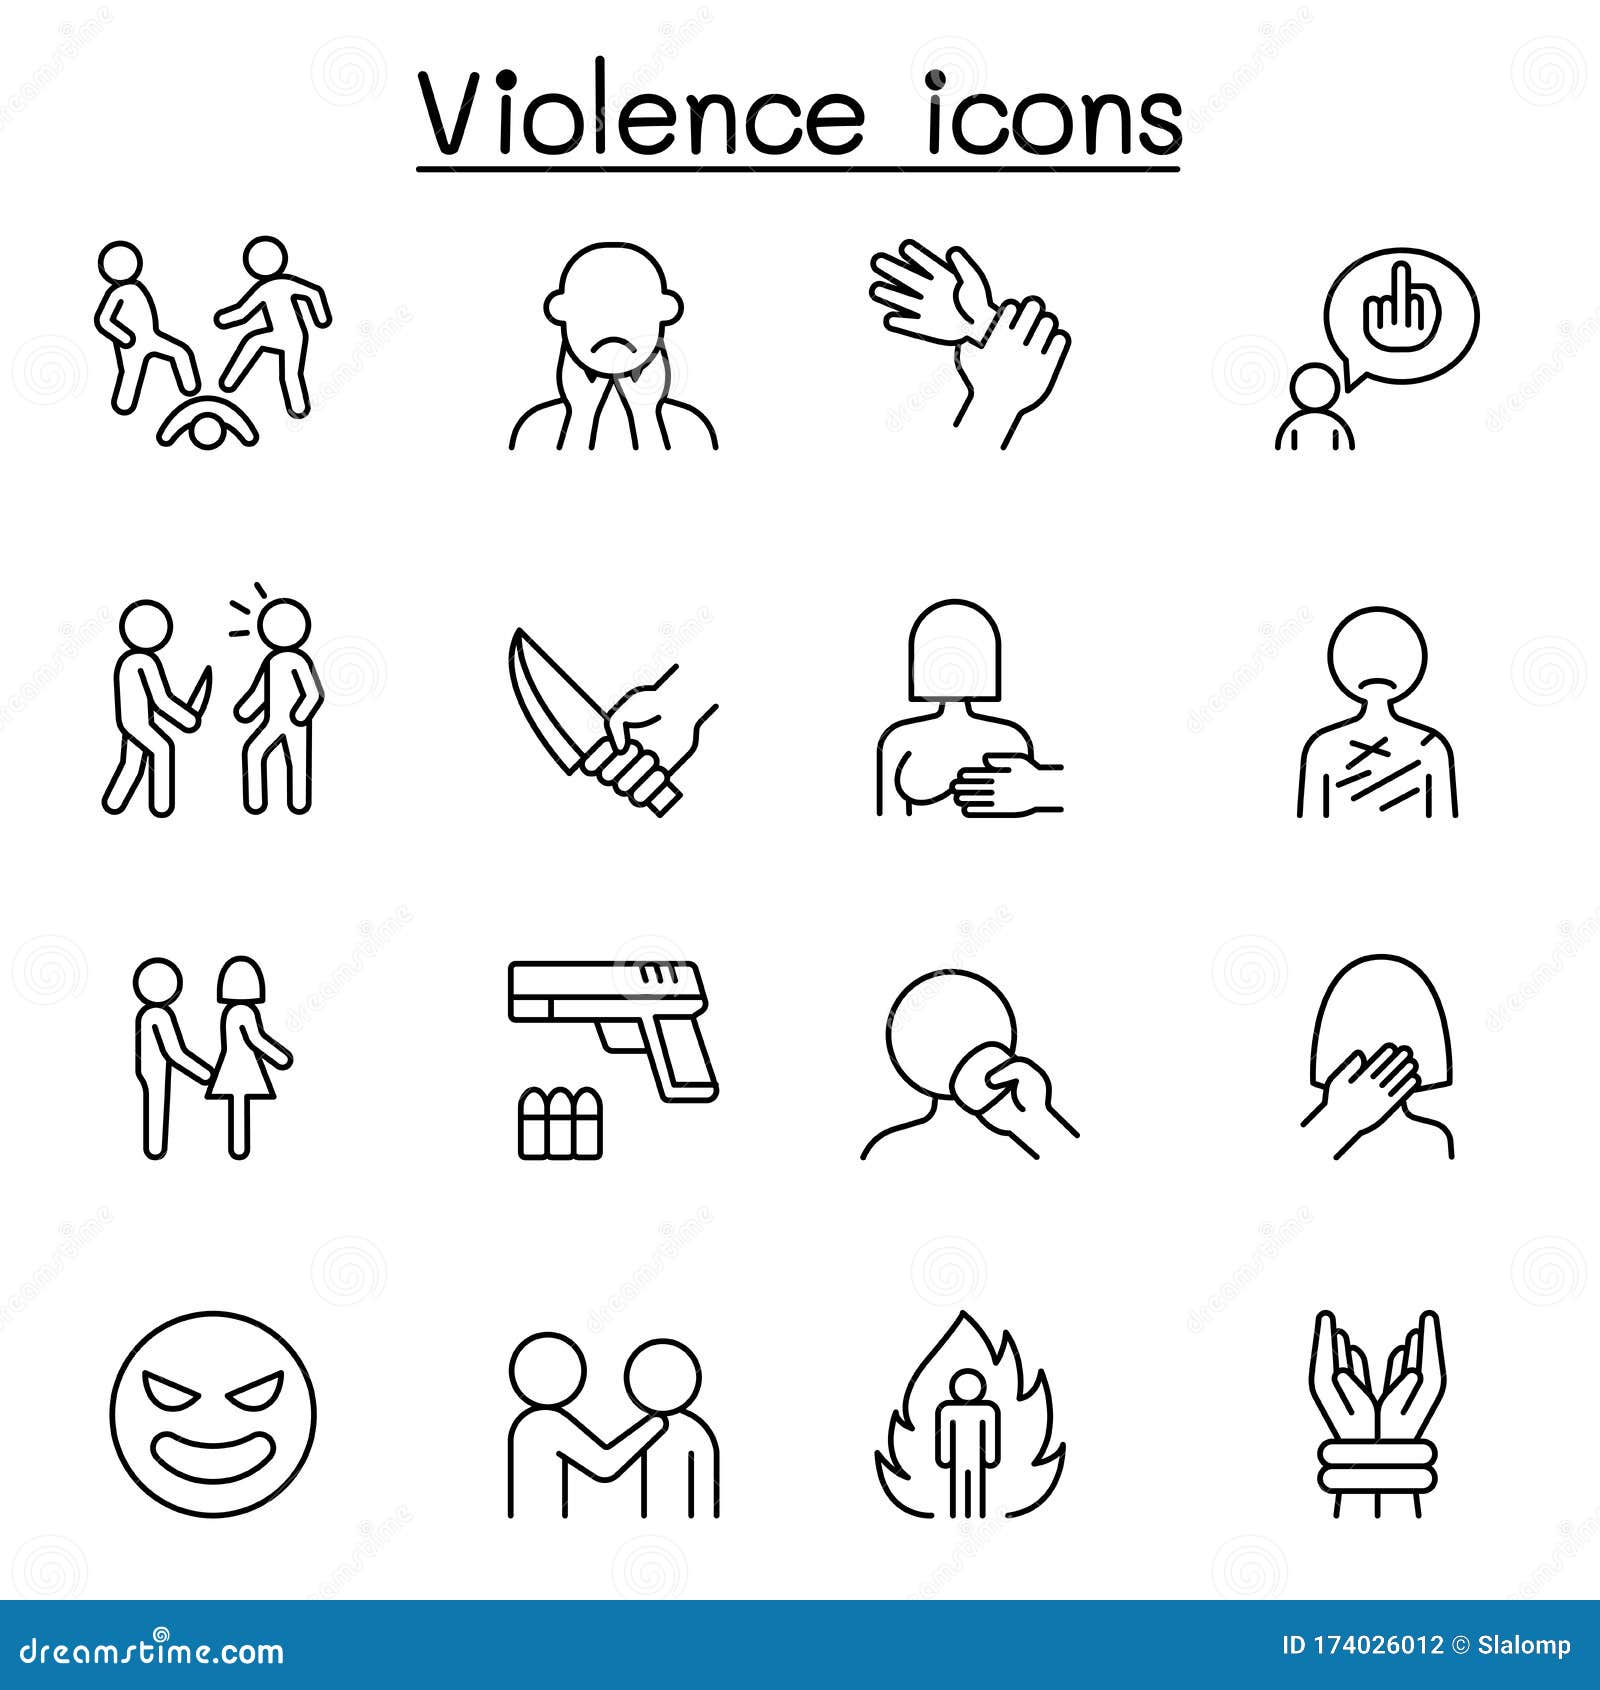 violence, human trafficking, abuse, sexual harassment icon set in thin line style